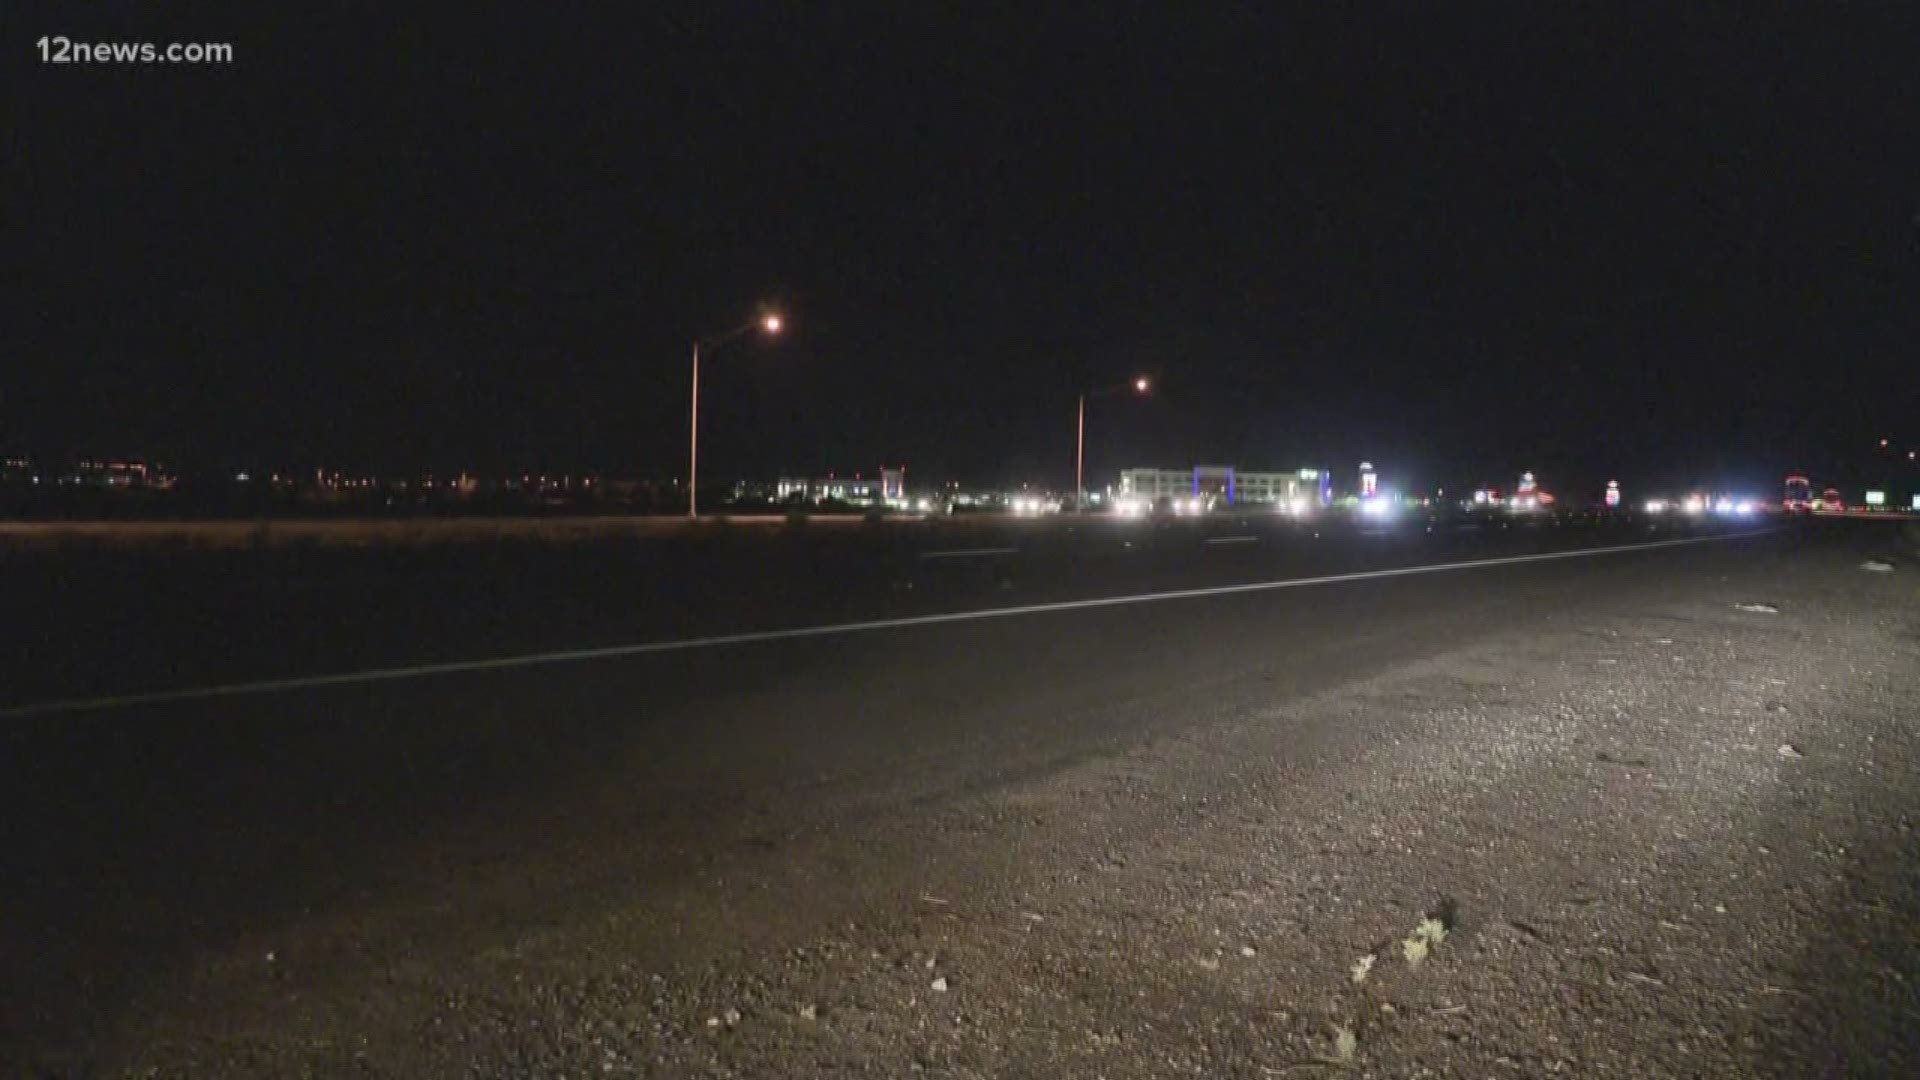 An 8-year-old girl was airlifted to Phoenix Children's Hospital Monday night after she was found lying injured on I-10 near Buckeye, the Arizona Department of Public Safety said.